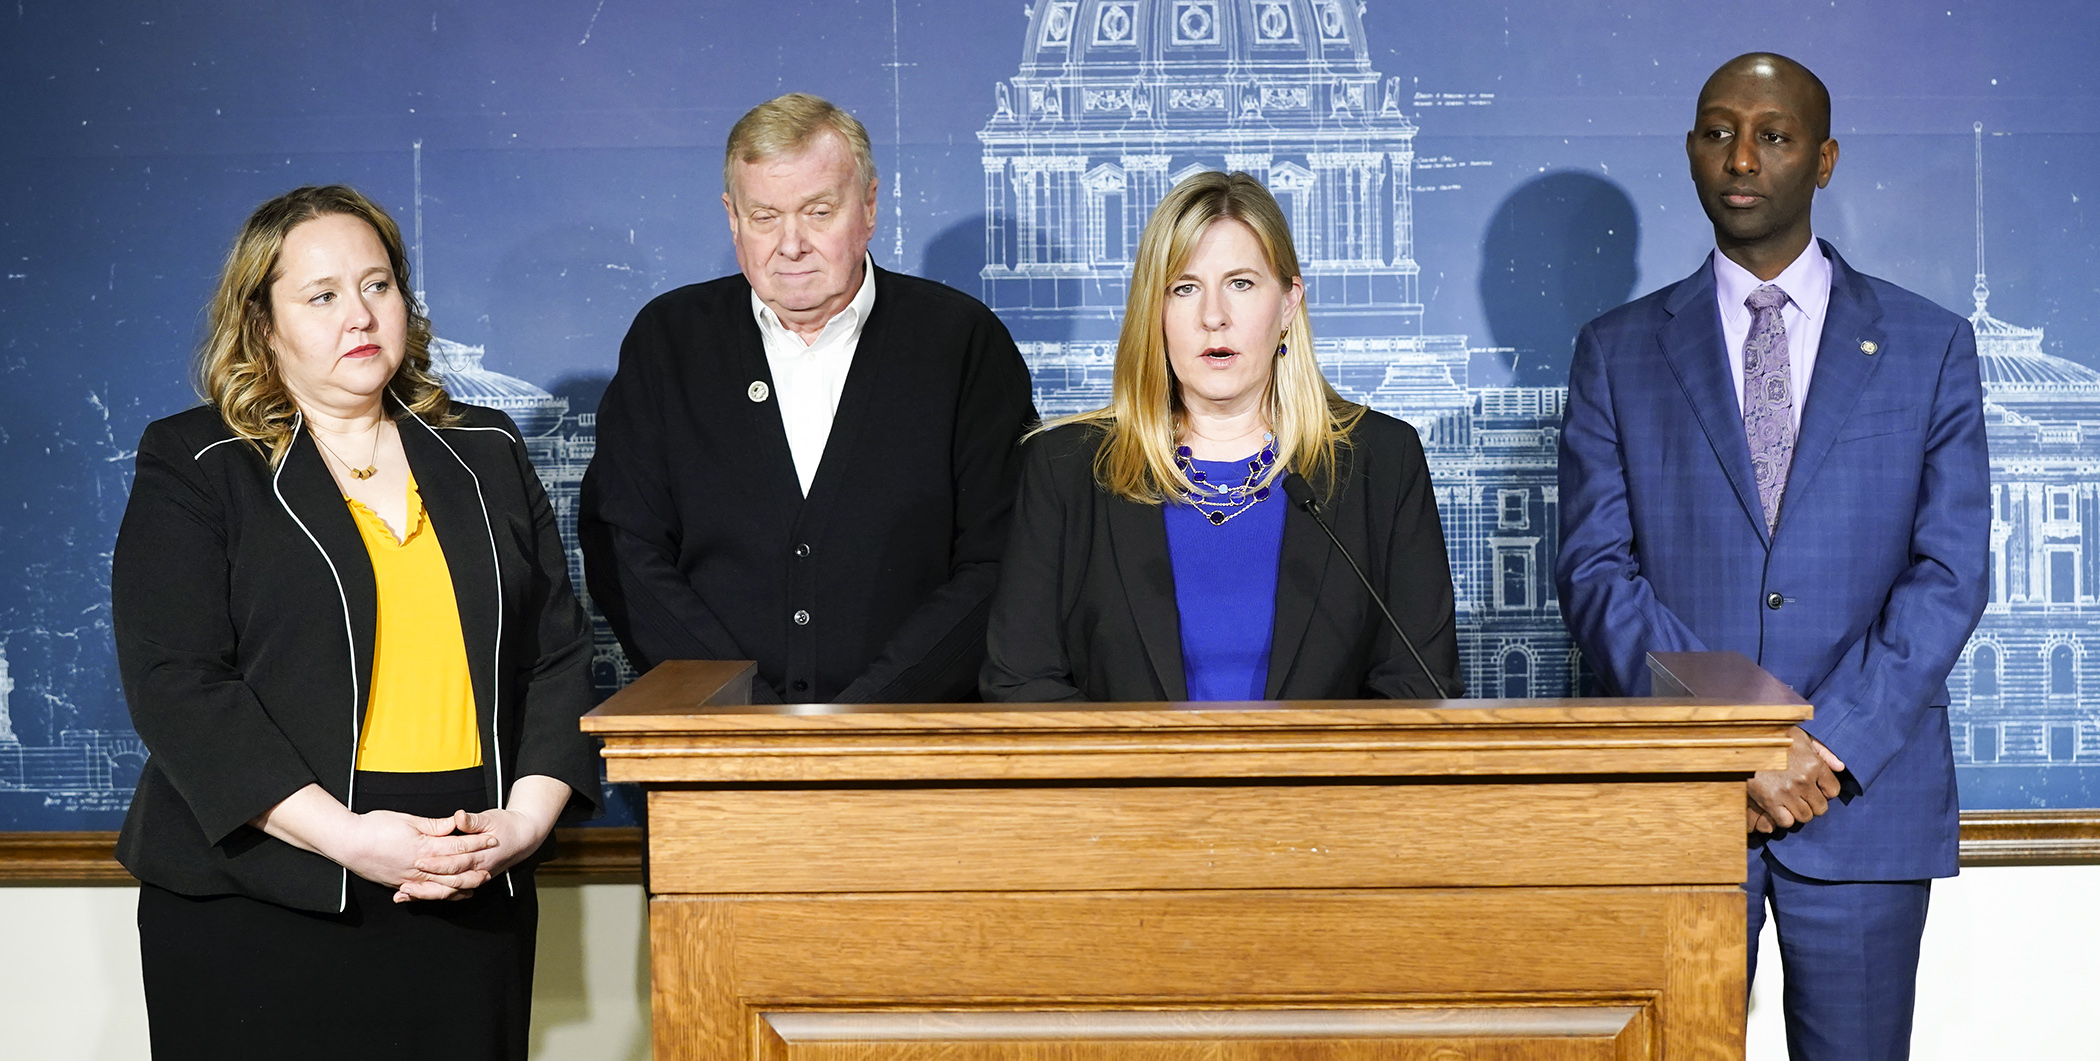 House Speaker Melissa Hortman addresses the media during an April 26 House DFL news conference about the UI trust fund/frontline worker pay bill passed in the House. (Photo by Paul Battaglia)